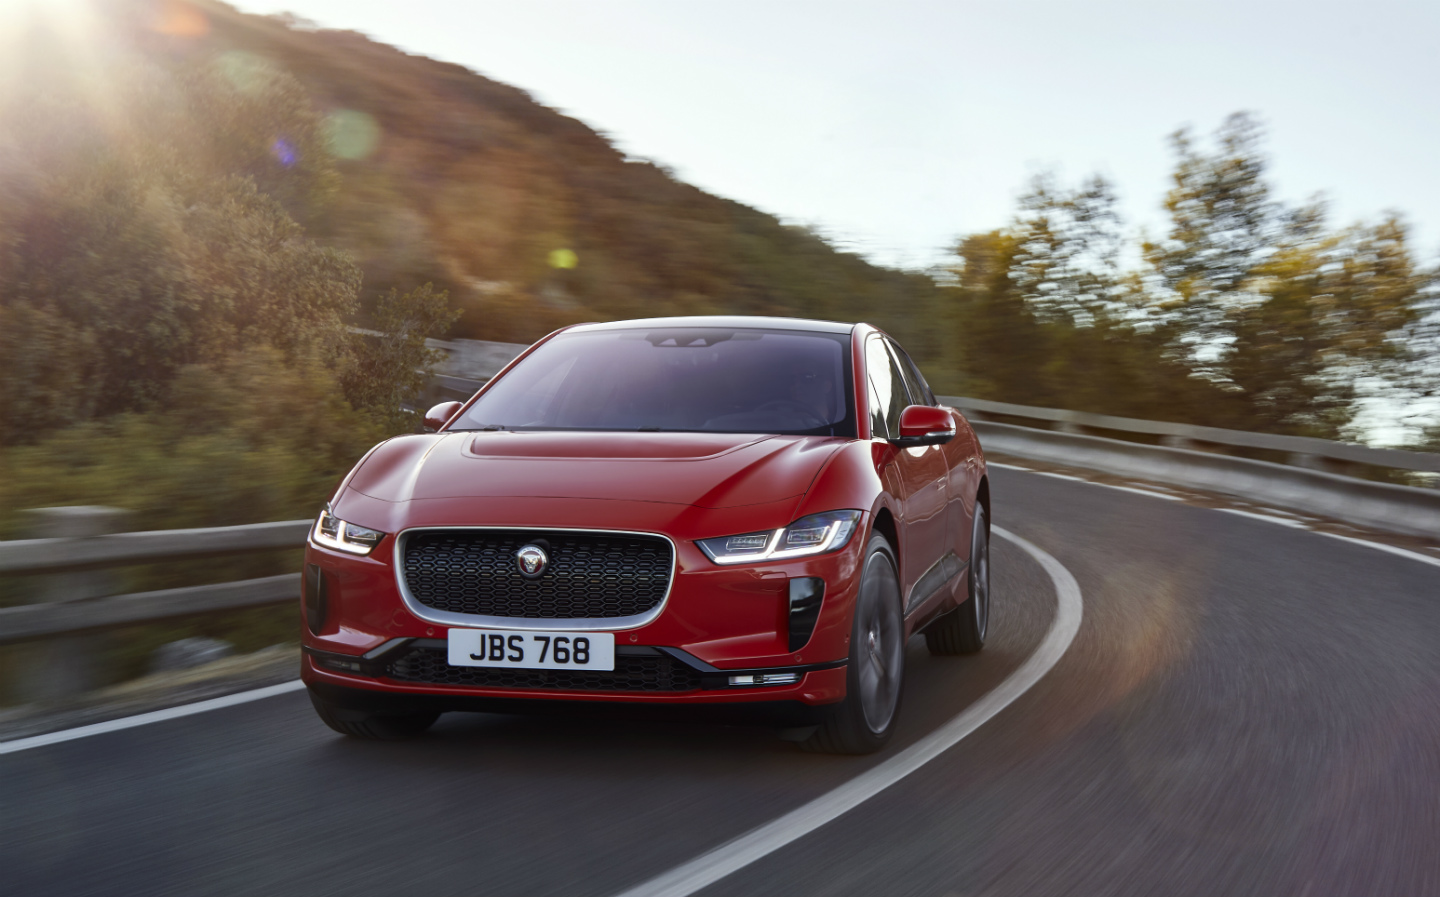 Electric dreams? Six things drivers need to know about the new Jaguar I-Pace